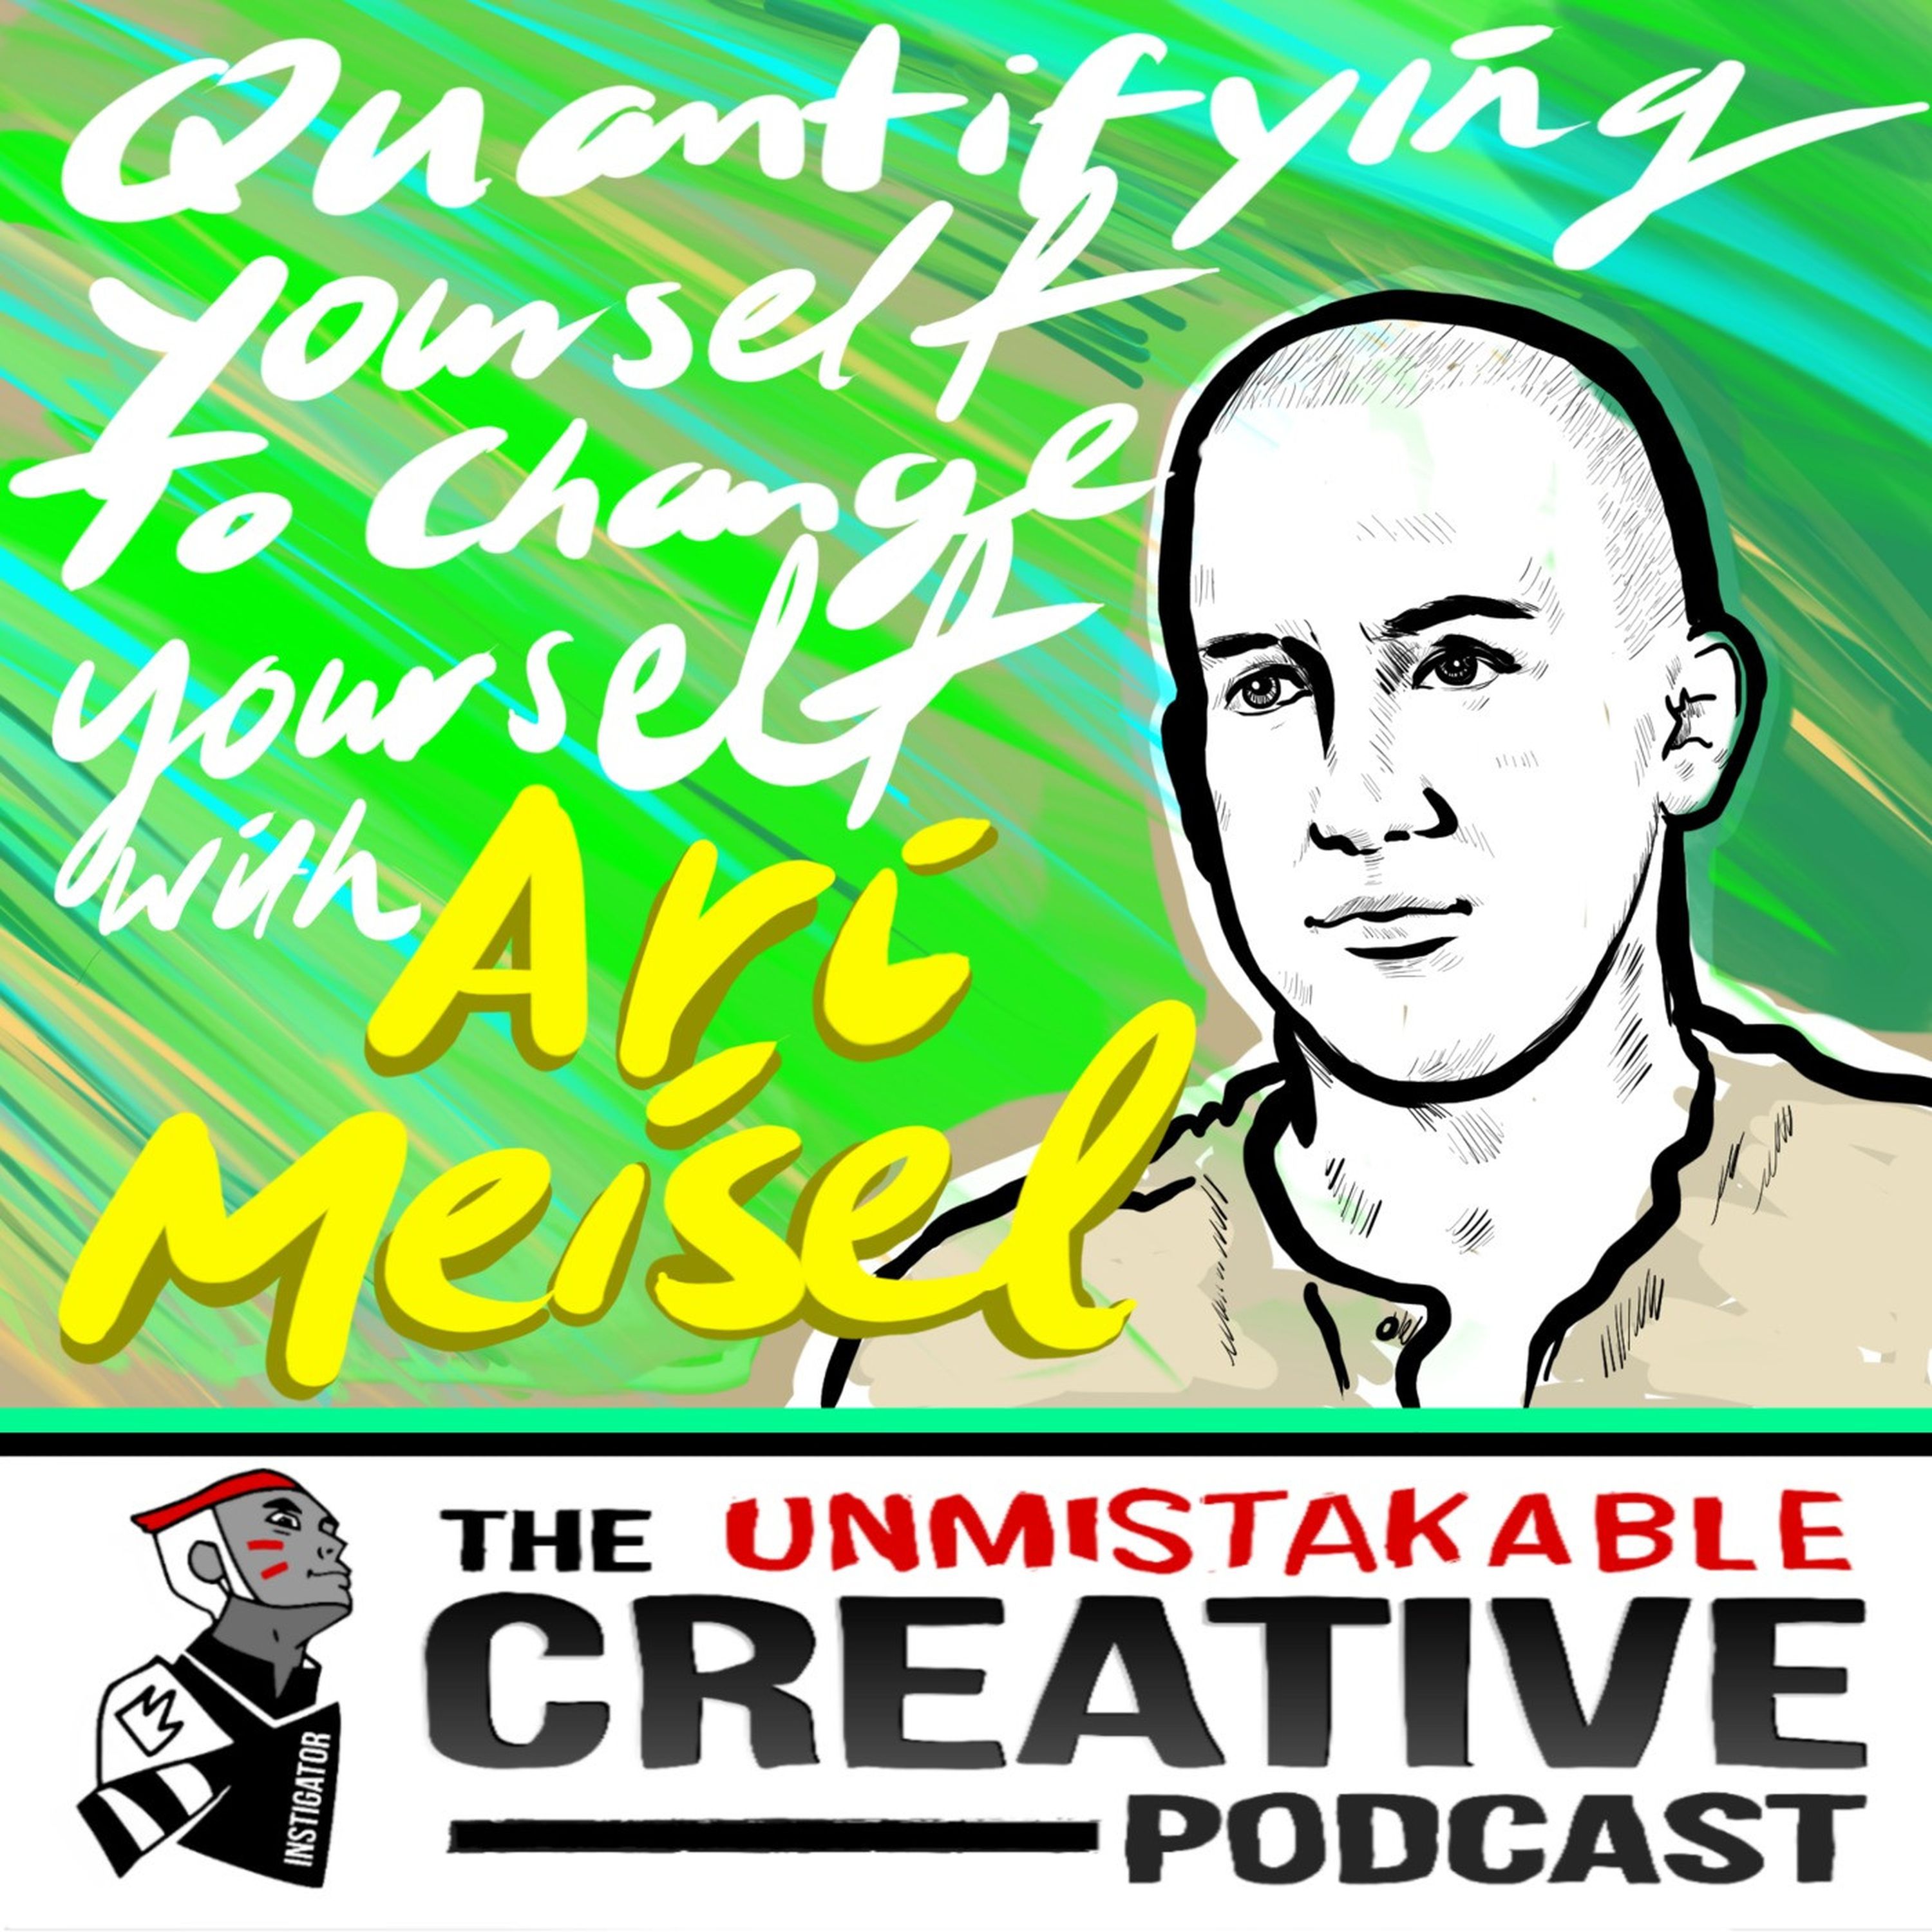 Quantifying Yourself to Change Yourself with Ari Meisel Image